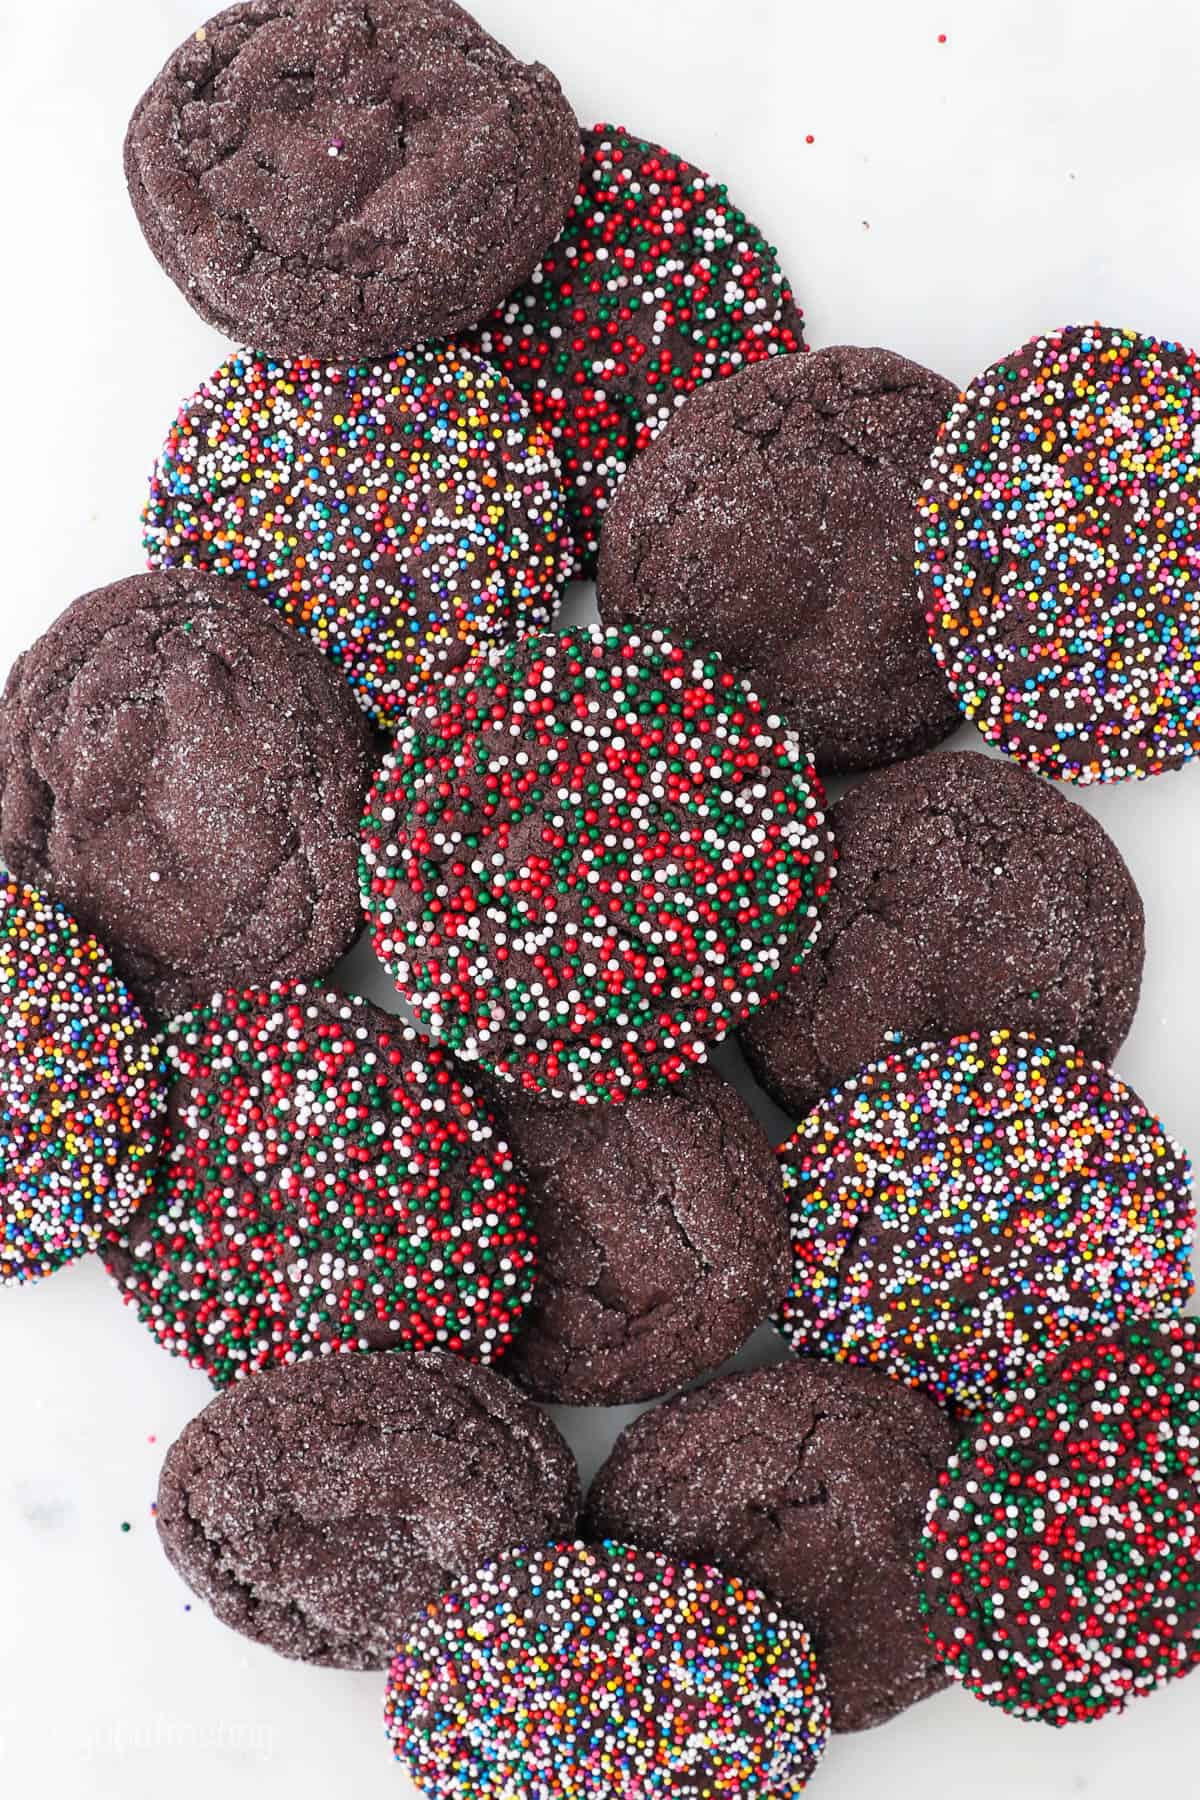 A pile of chocolate sugar cookies with various decorations on top of a white countertop